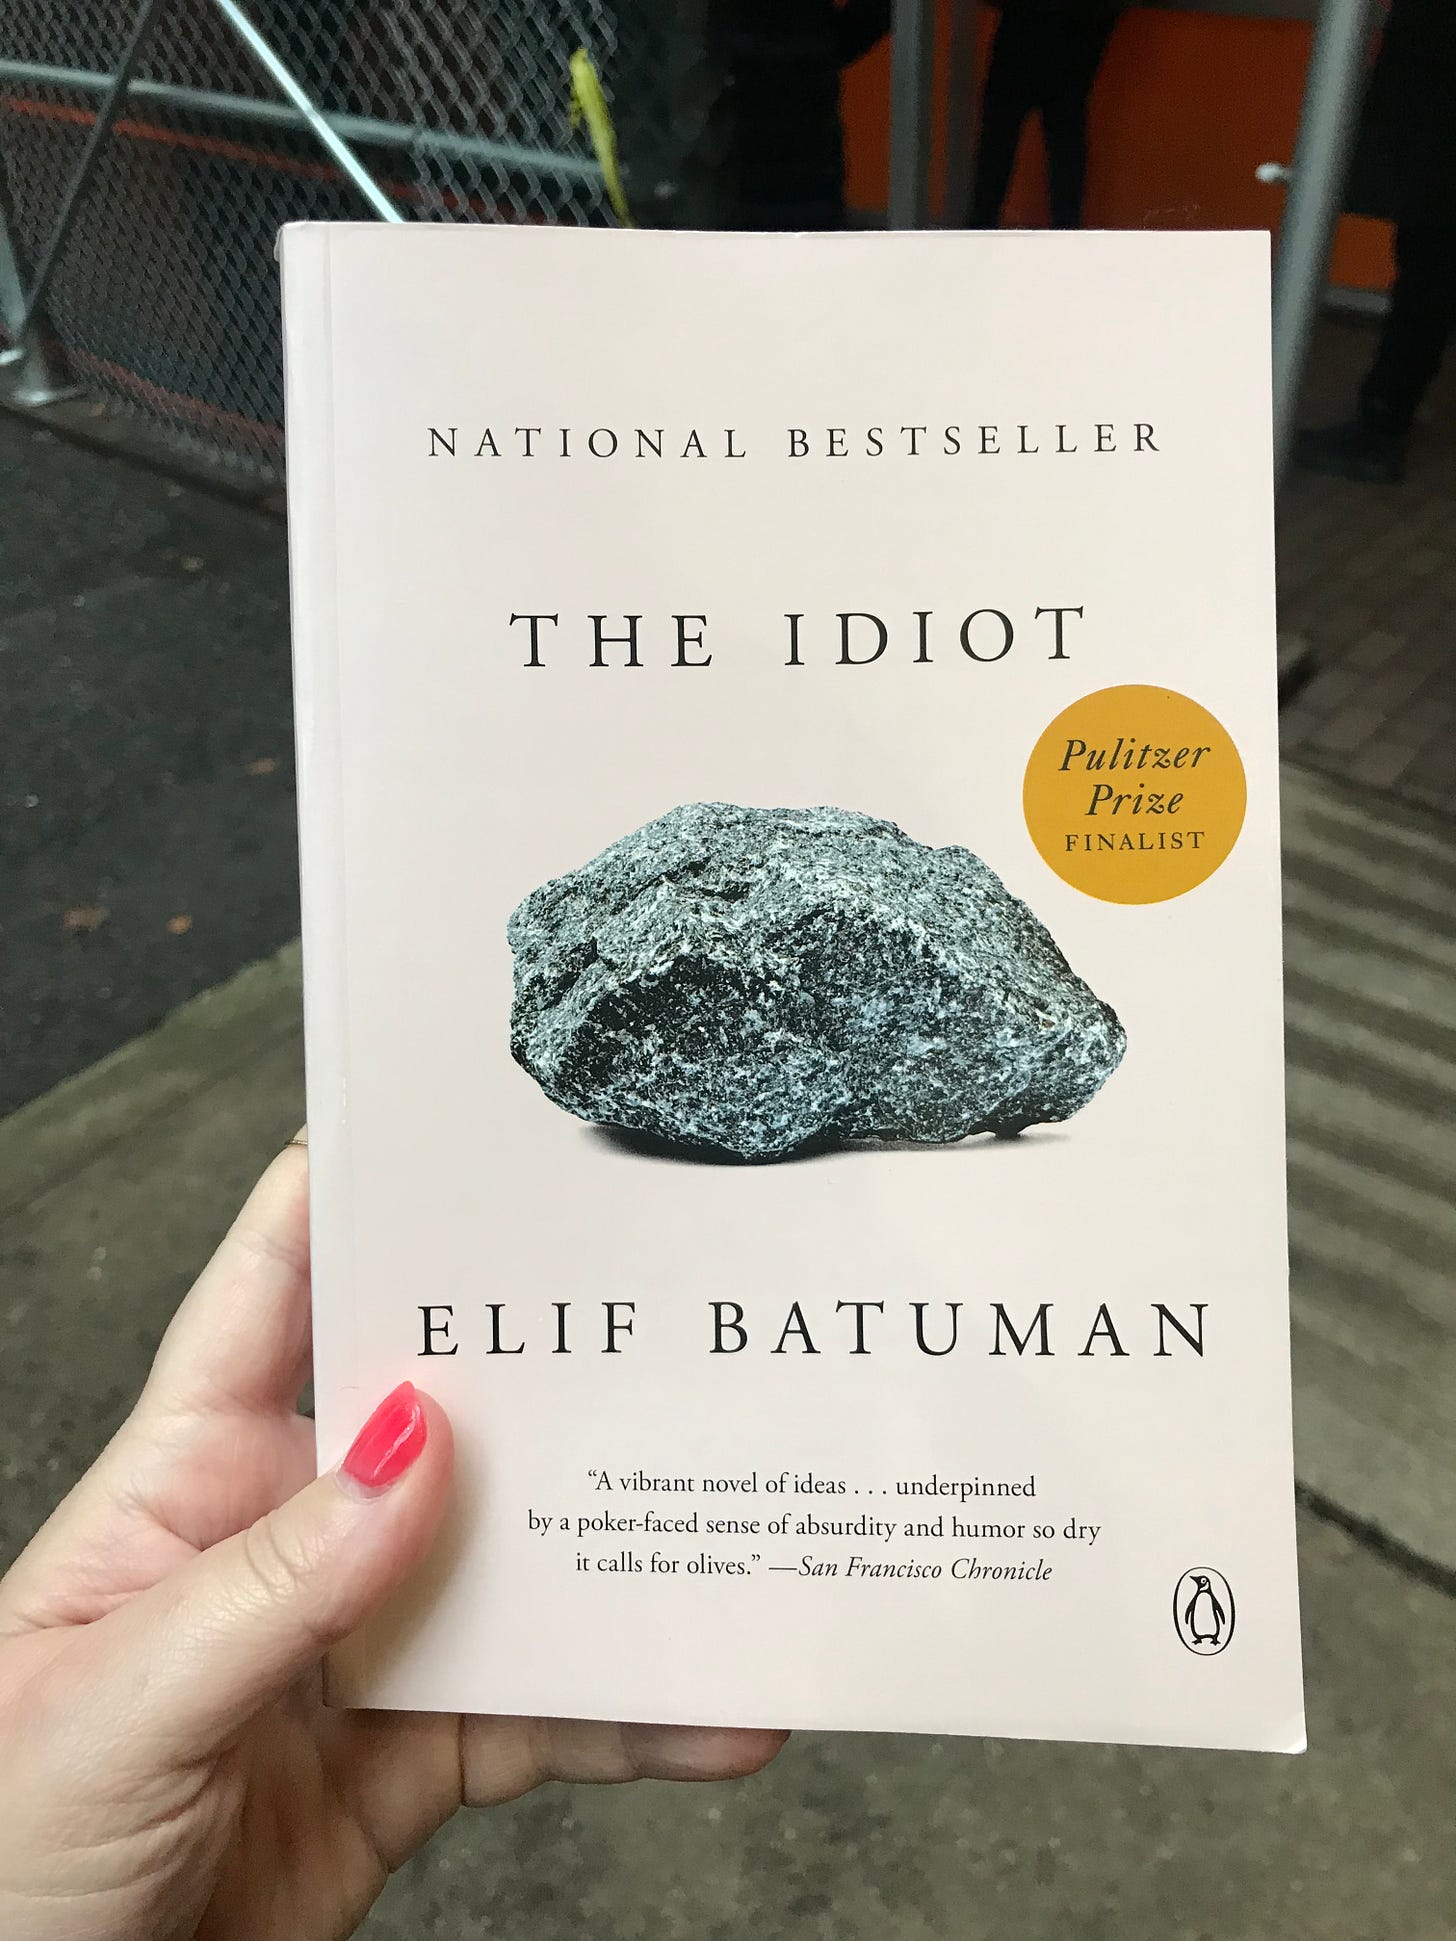 A hand holding a copy of Elif Batuman's The Idiot, with concrete and metal fencing behind the book.